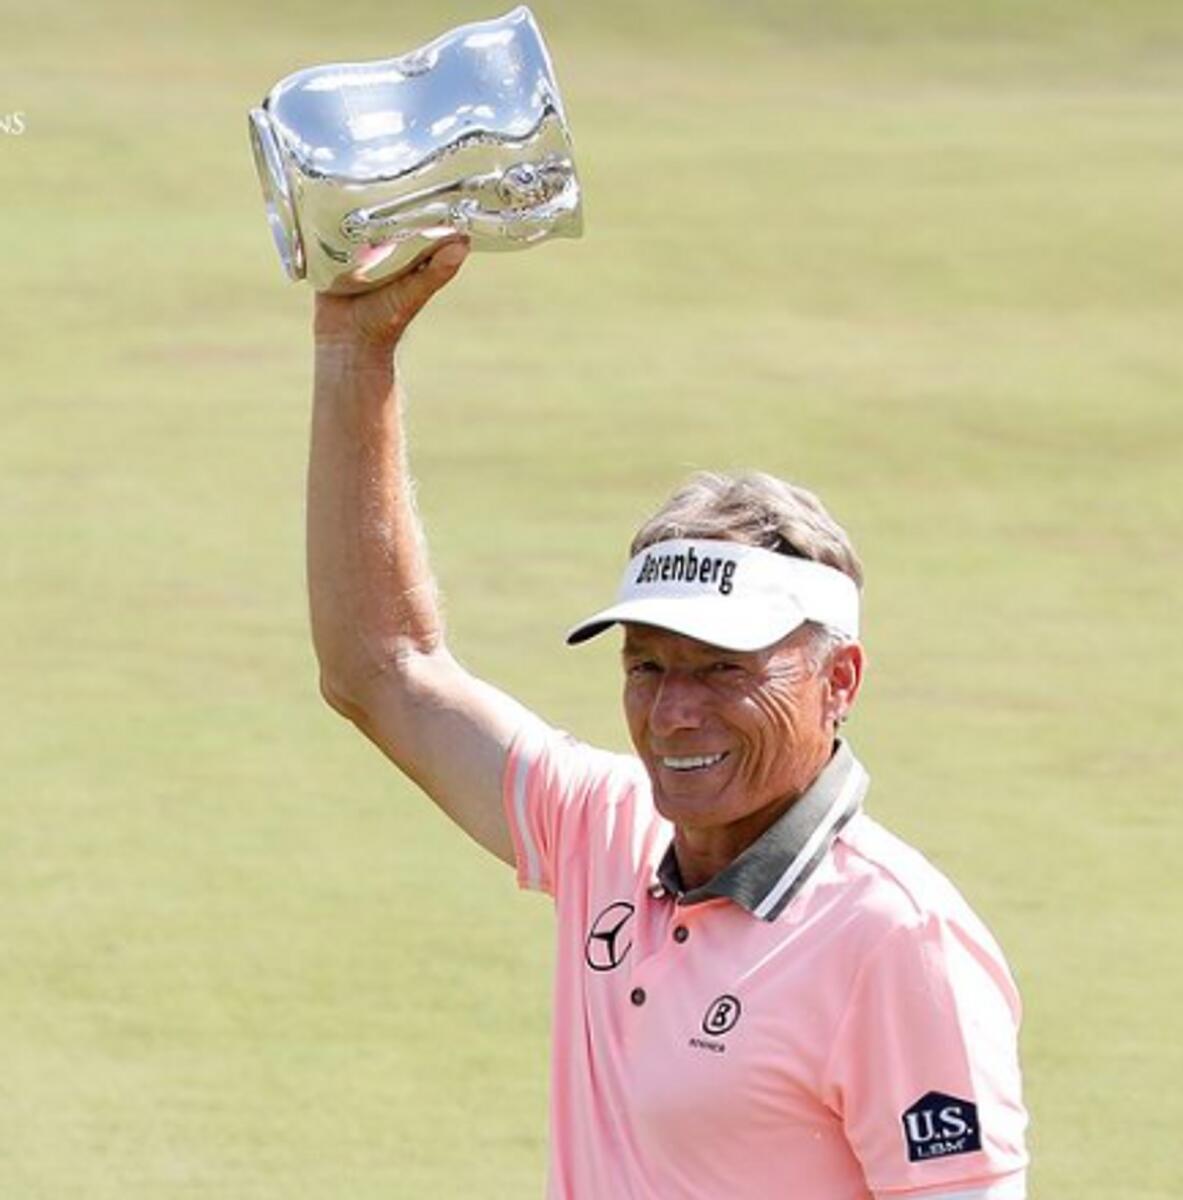 The oldest Senior U.S. Open champion ever! Last year, Bernhard Langer made history at age 65 while breaking Hale Irwin’s record for most Champions Tour wins (46). - Instagram